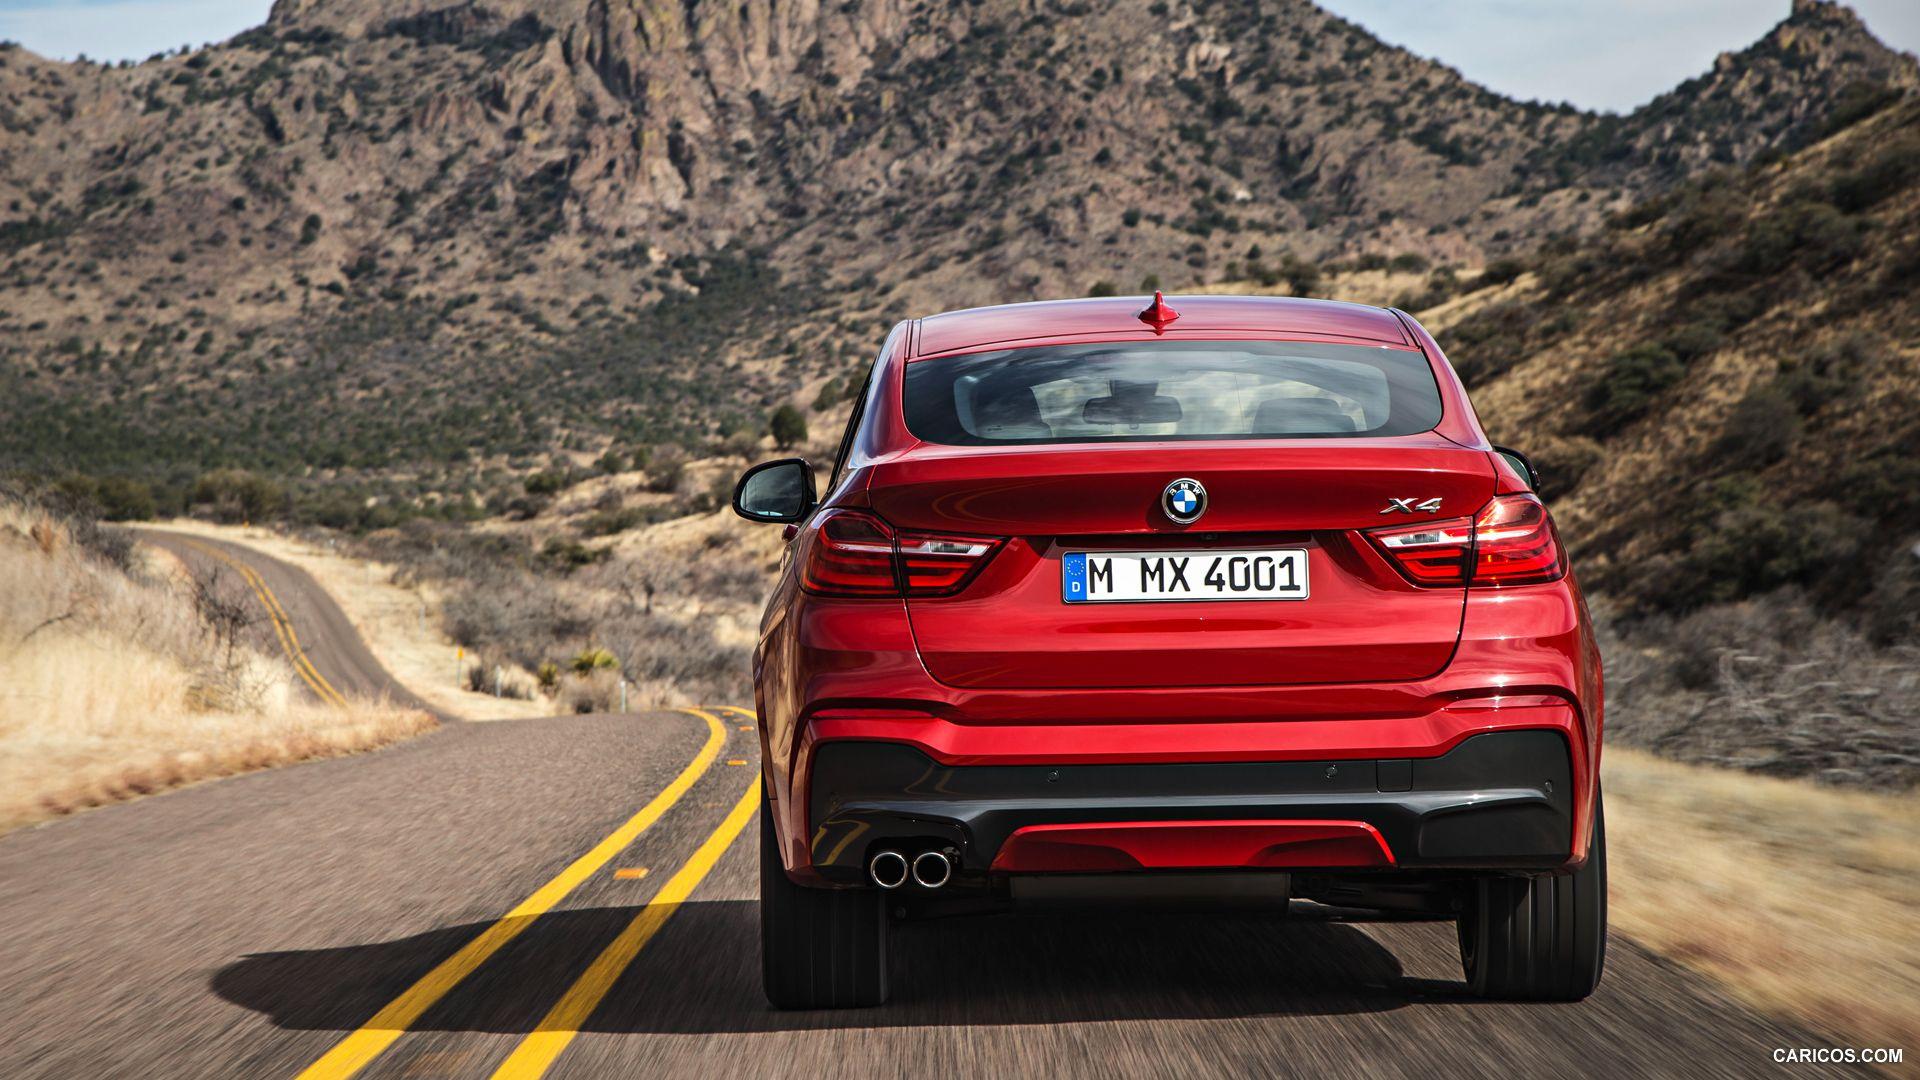 BMW X4 Wallpaper, Picture, Image